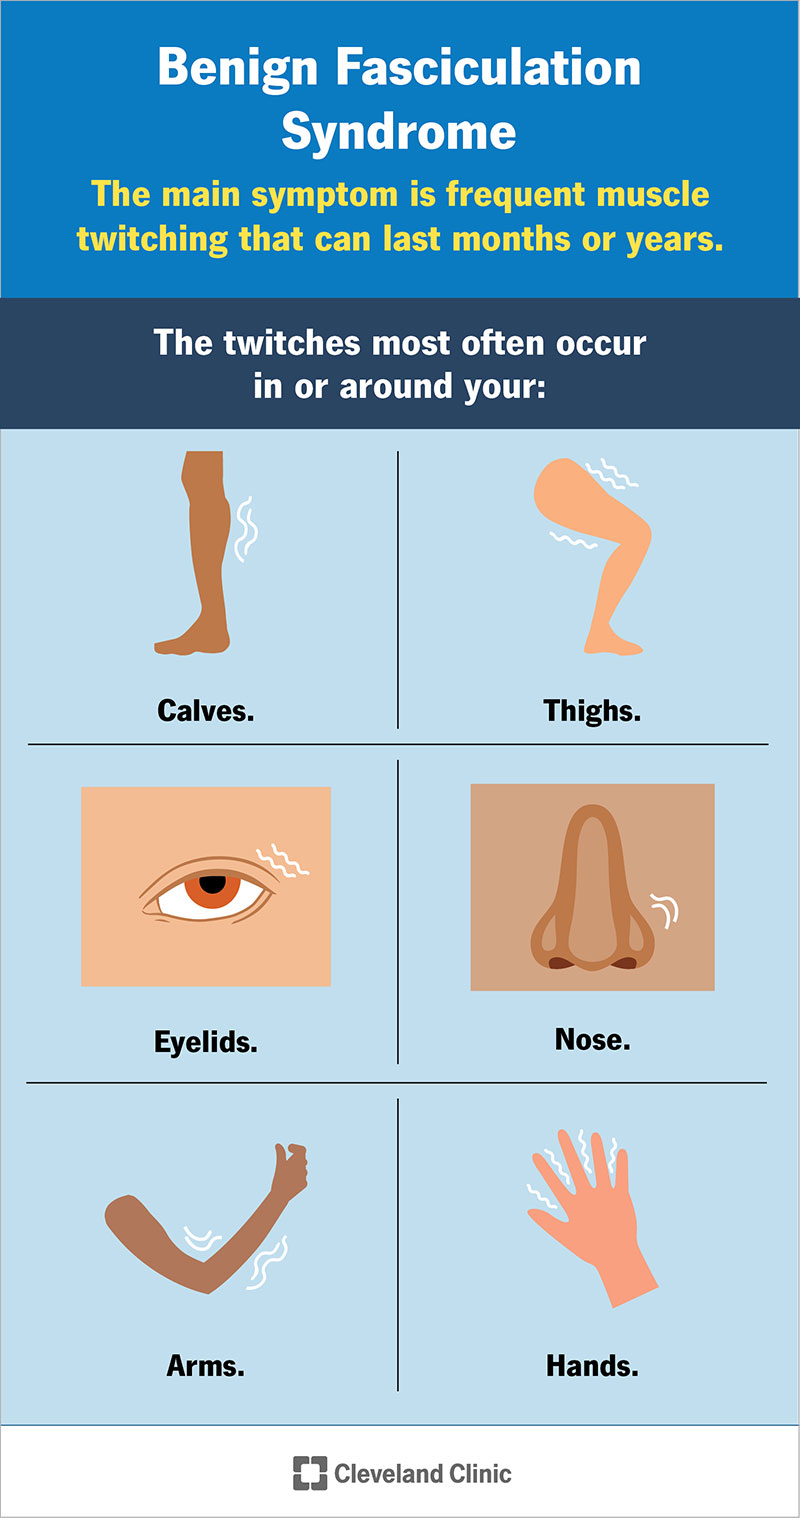 The twitches most often occur in or around your calves, thighs, eyelids, nose, arms and/or hands.